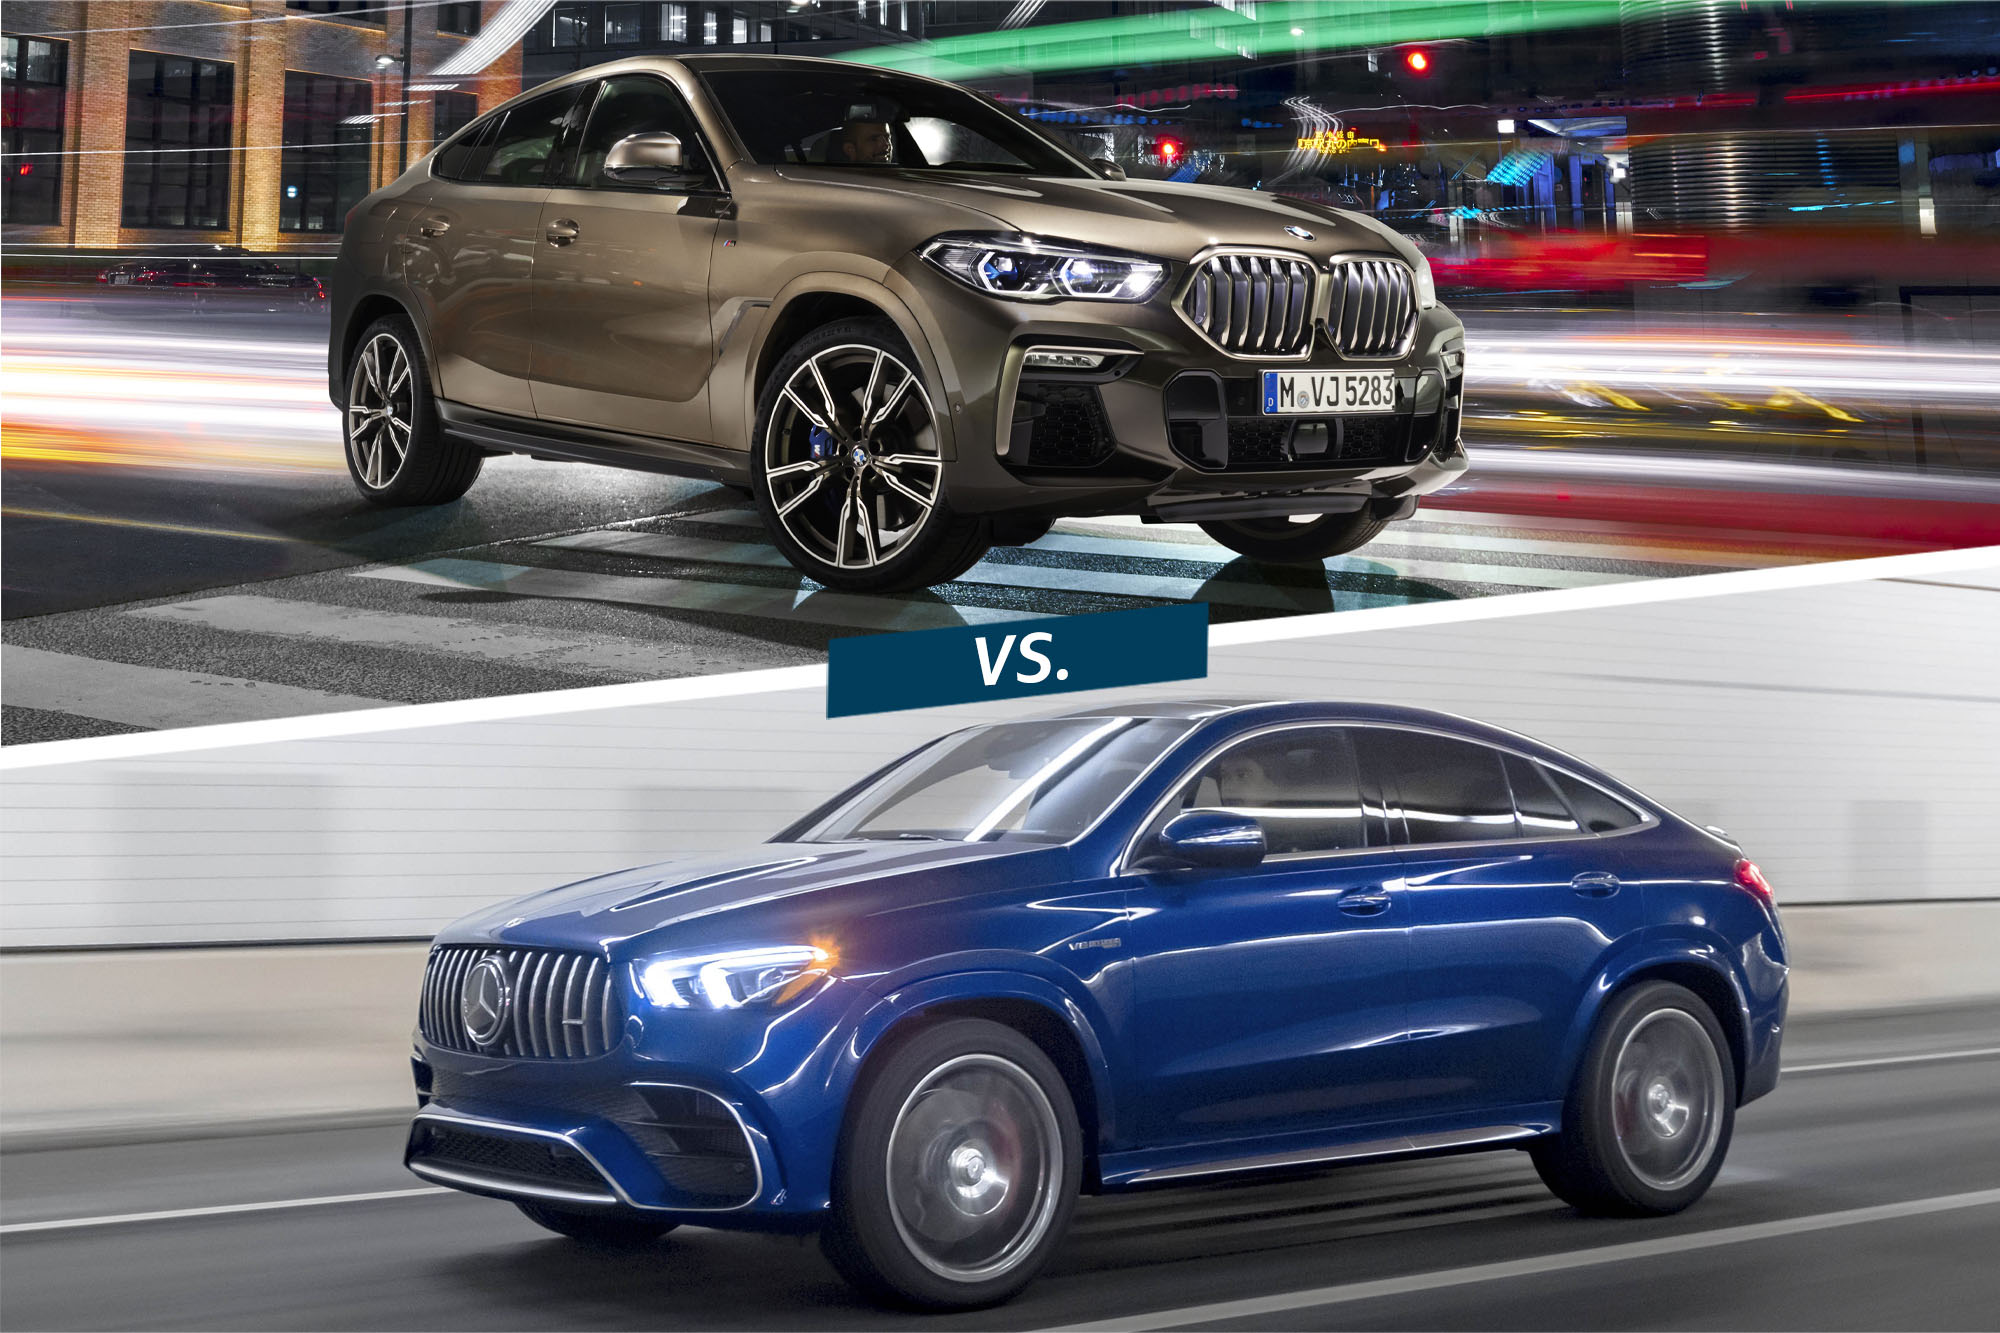 Split image of a brown BMW X6 atop a blue Mercedes-AMG GLE 63 S Coupe